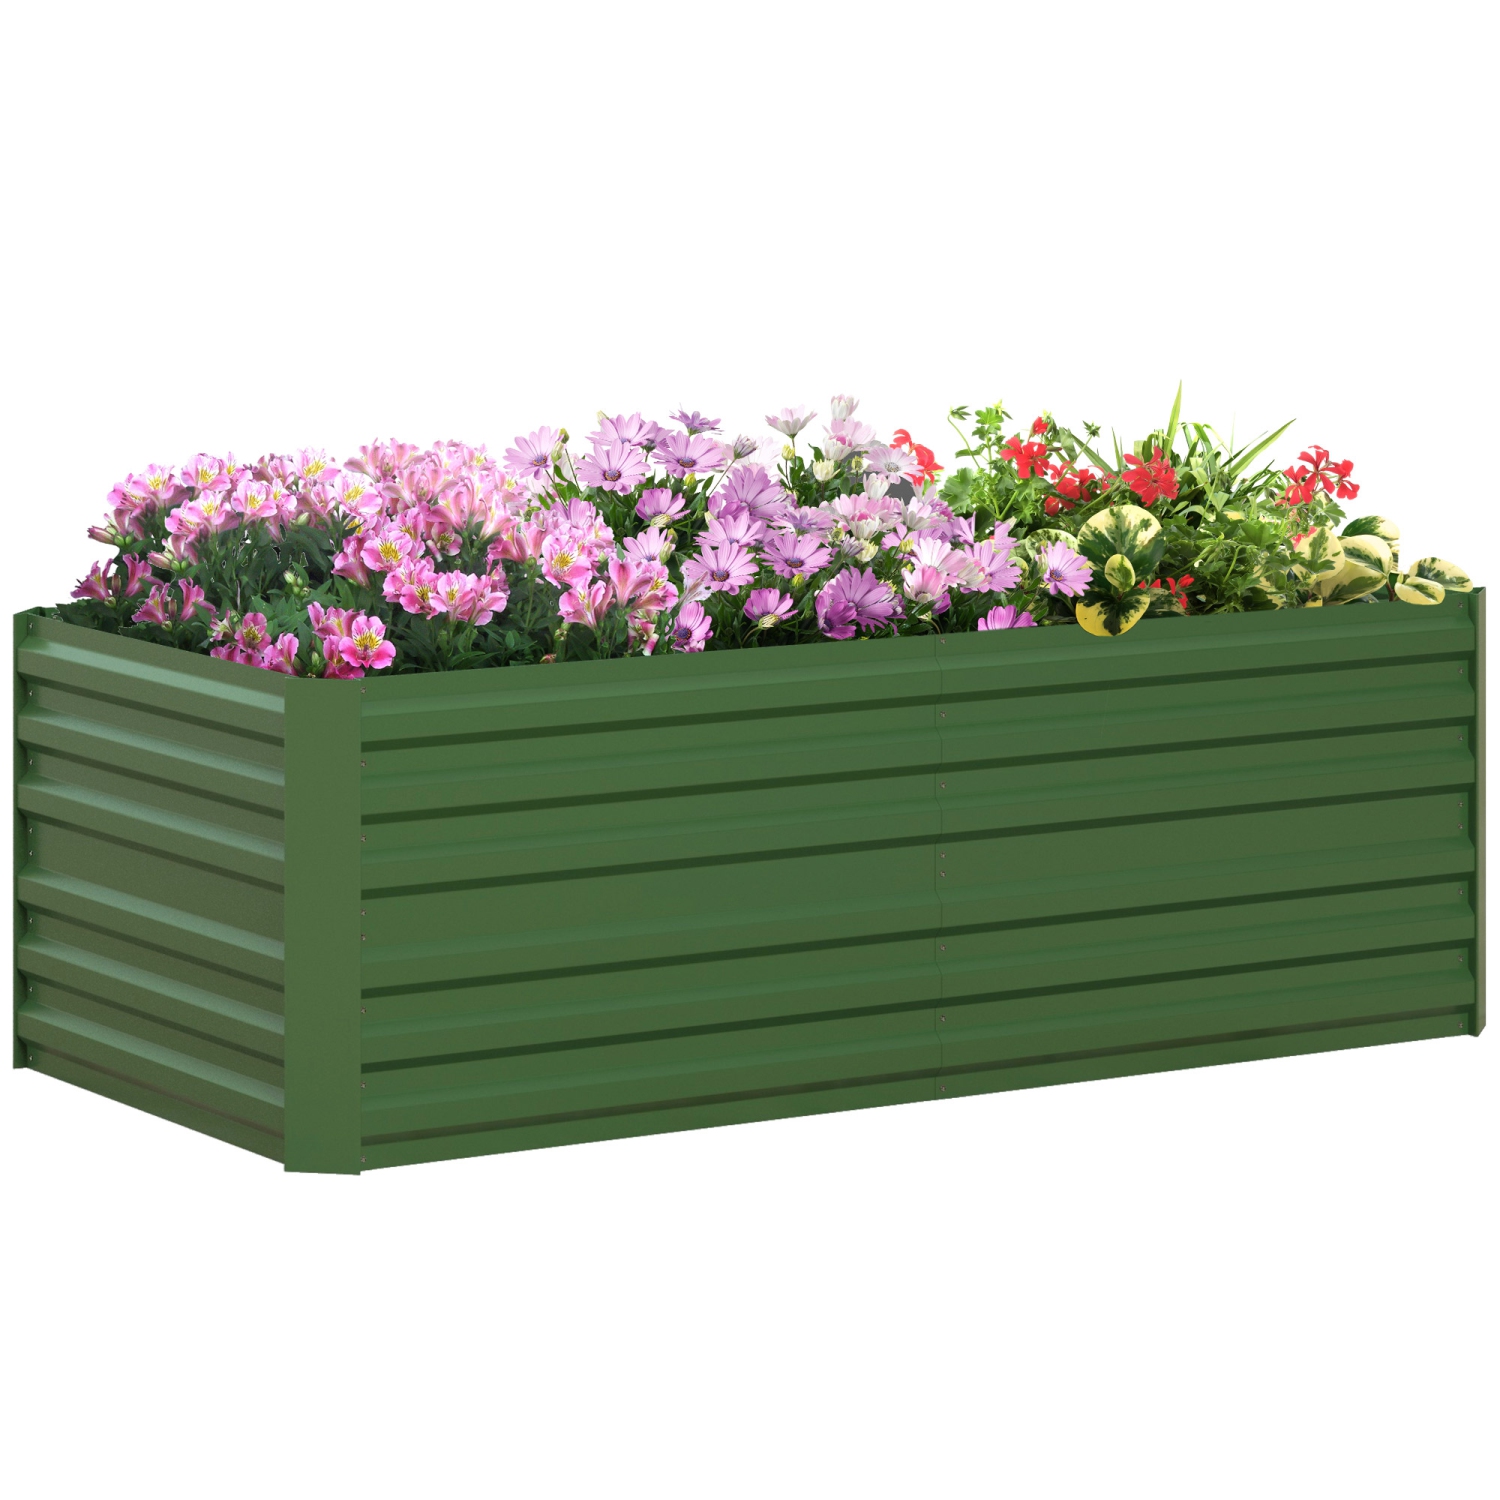 Outsunny Raised Garden Bed, 71" x 35" x 23" Galvanized Steel Planters for Outdoor Plants with Multi-reinforced Rods for Vegetables, Flowers and Herbs, Green